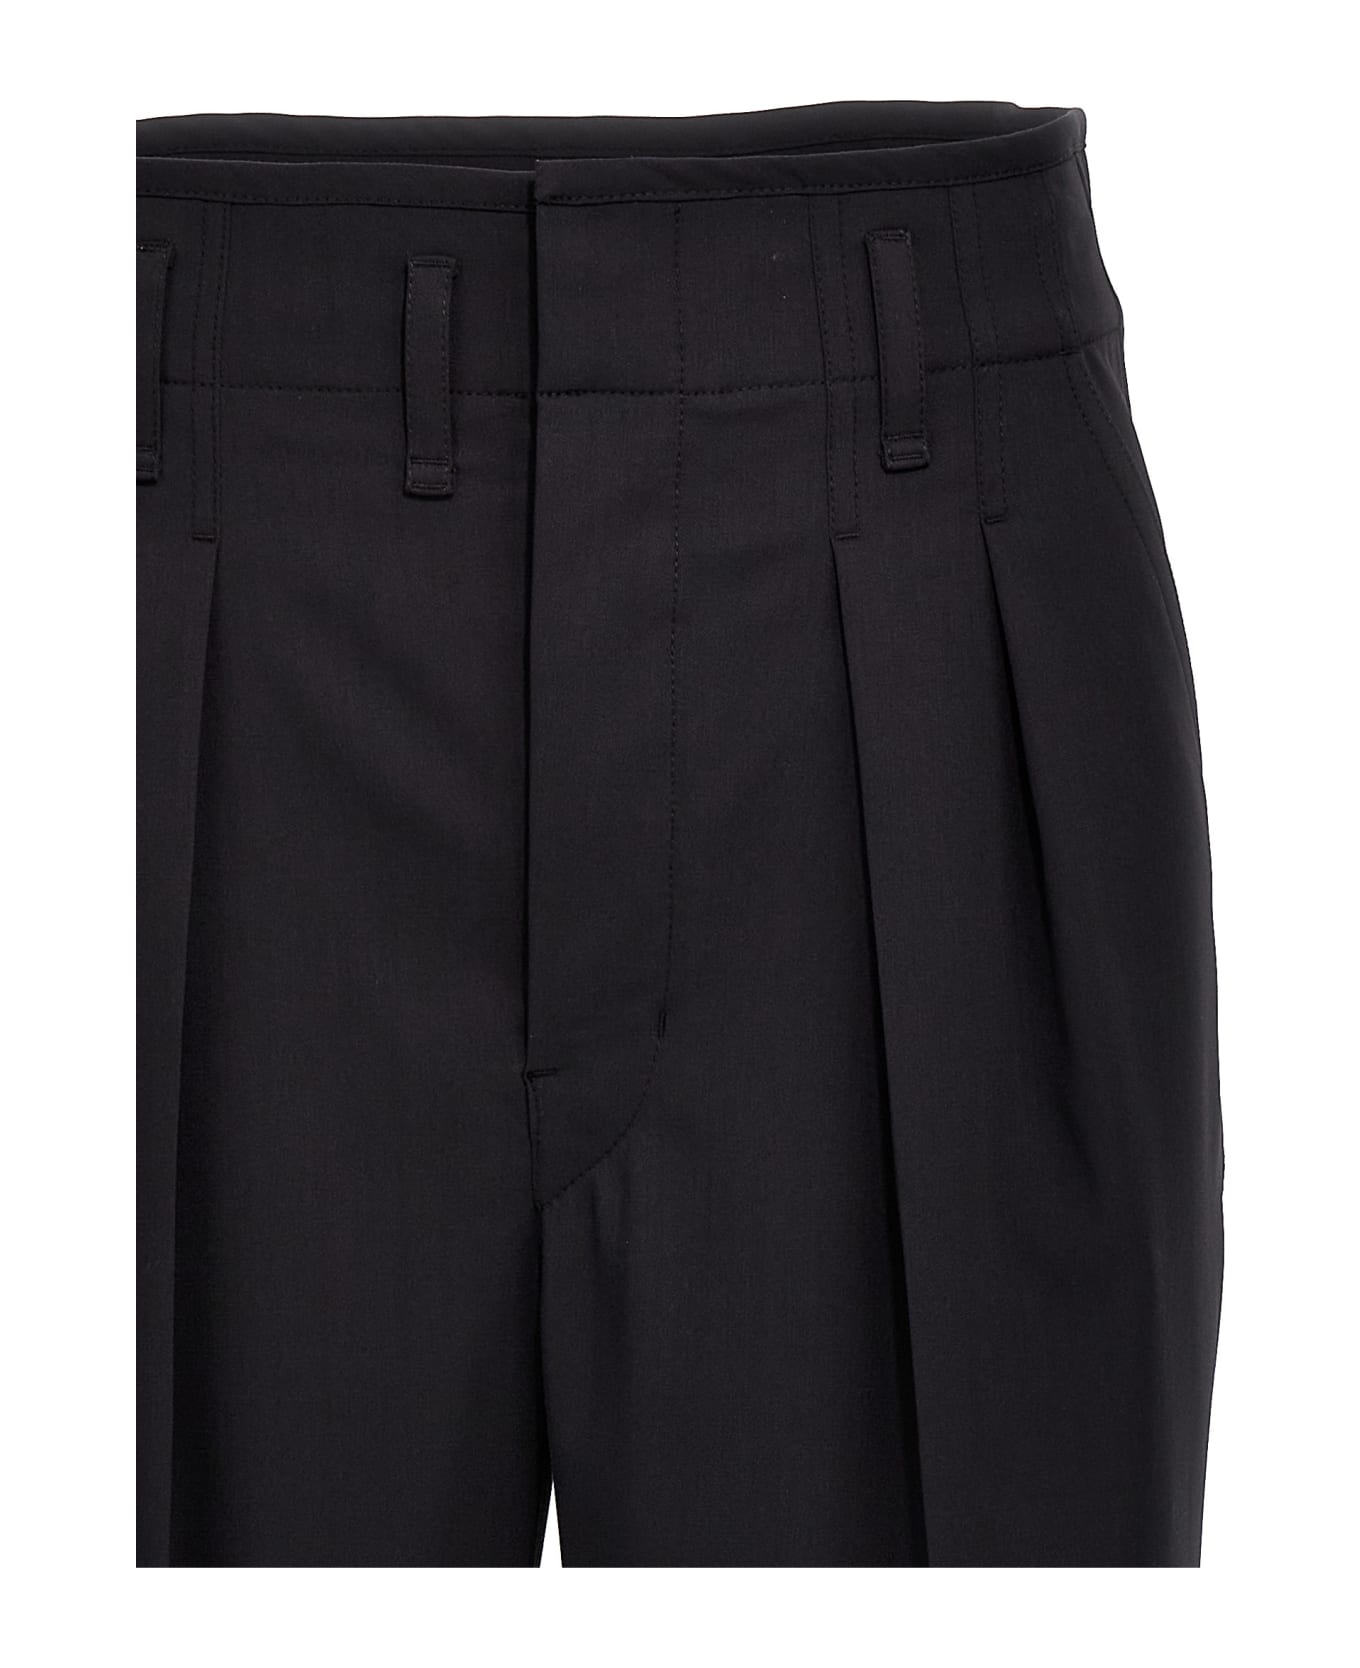 Lemaire 'tailored' Pants - BLACK